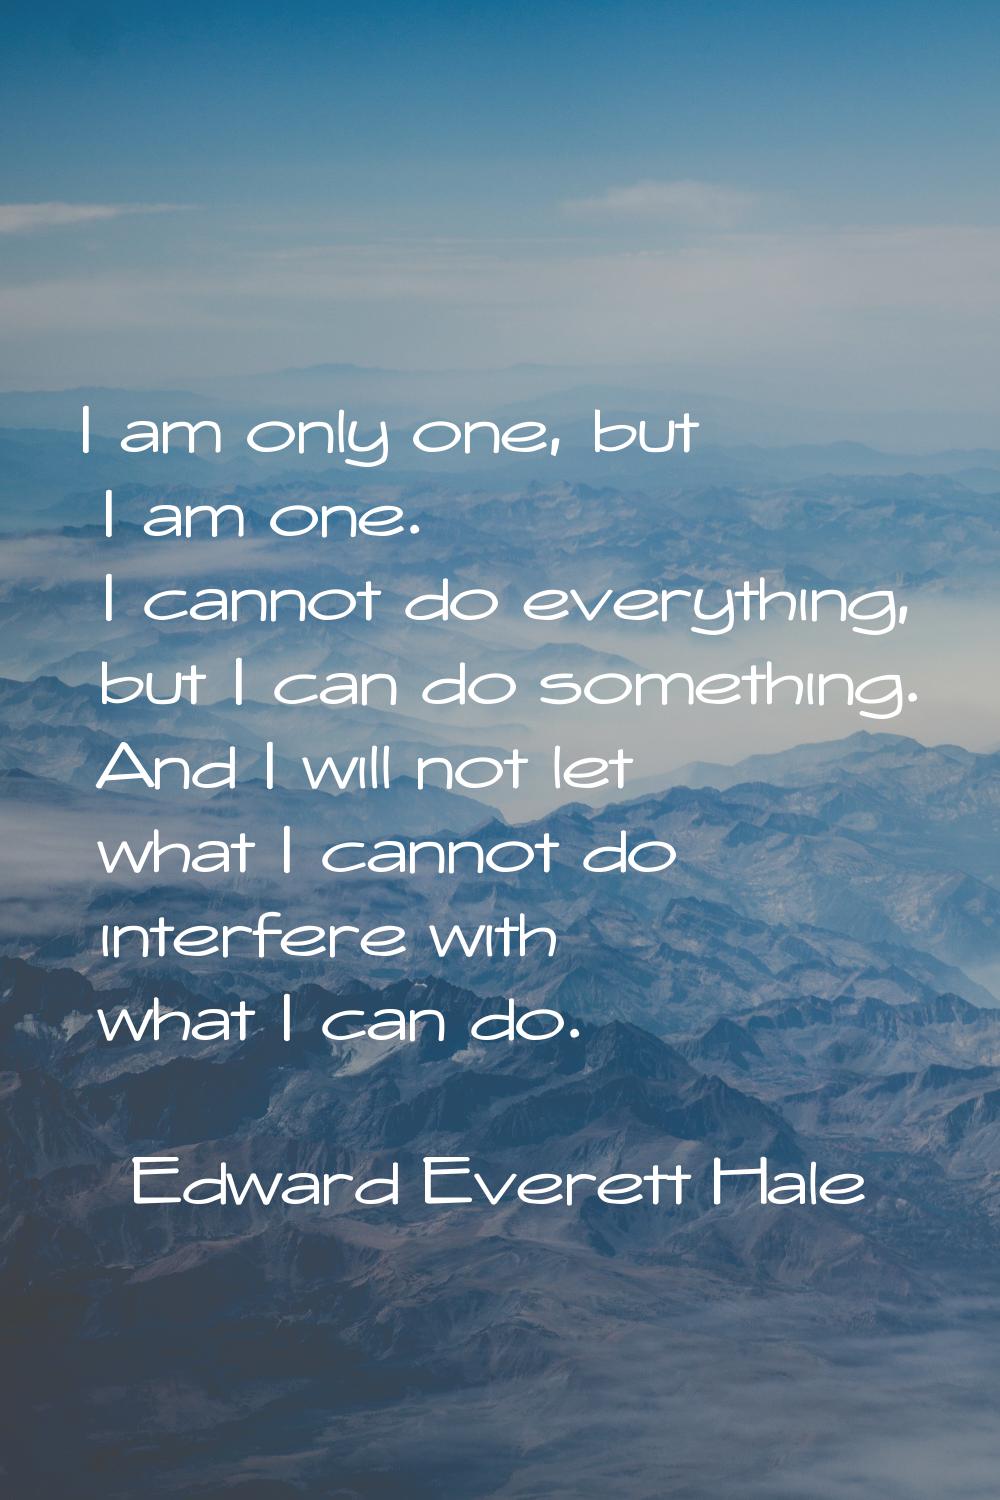 I am only one, but I am one. I cannot do everything, but I can do something. And I will not let wha